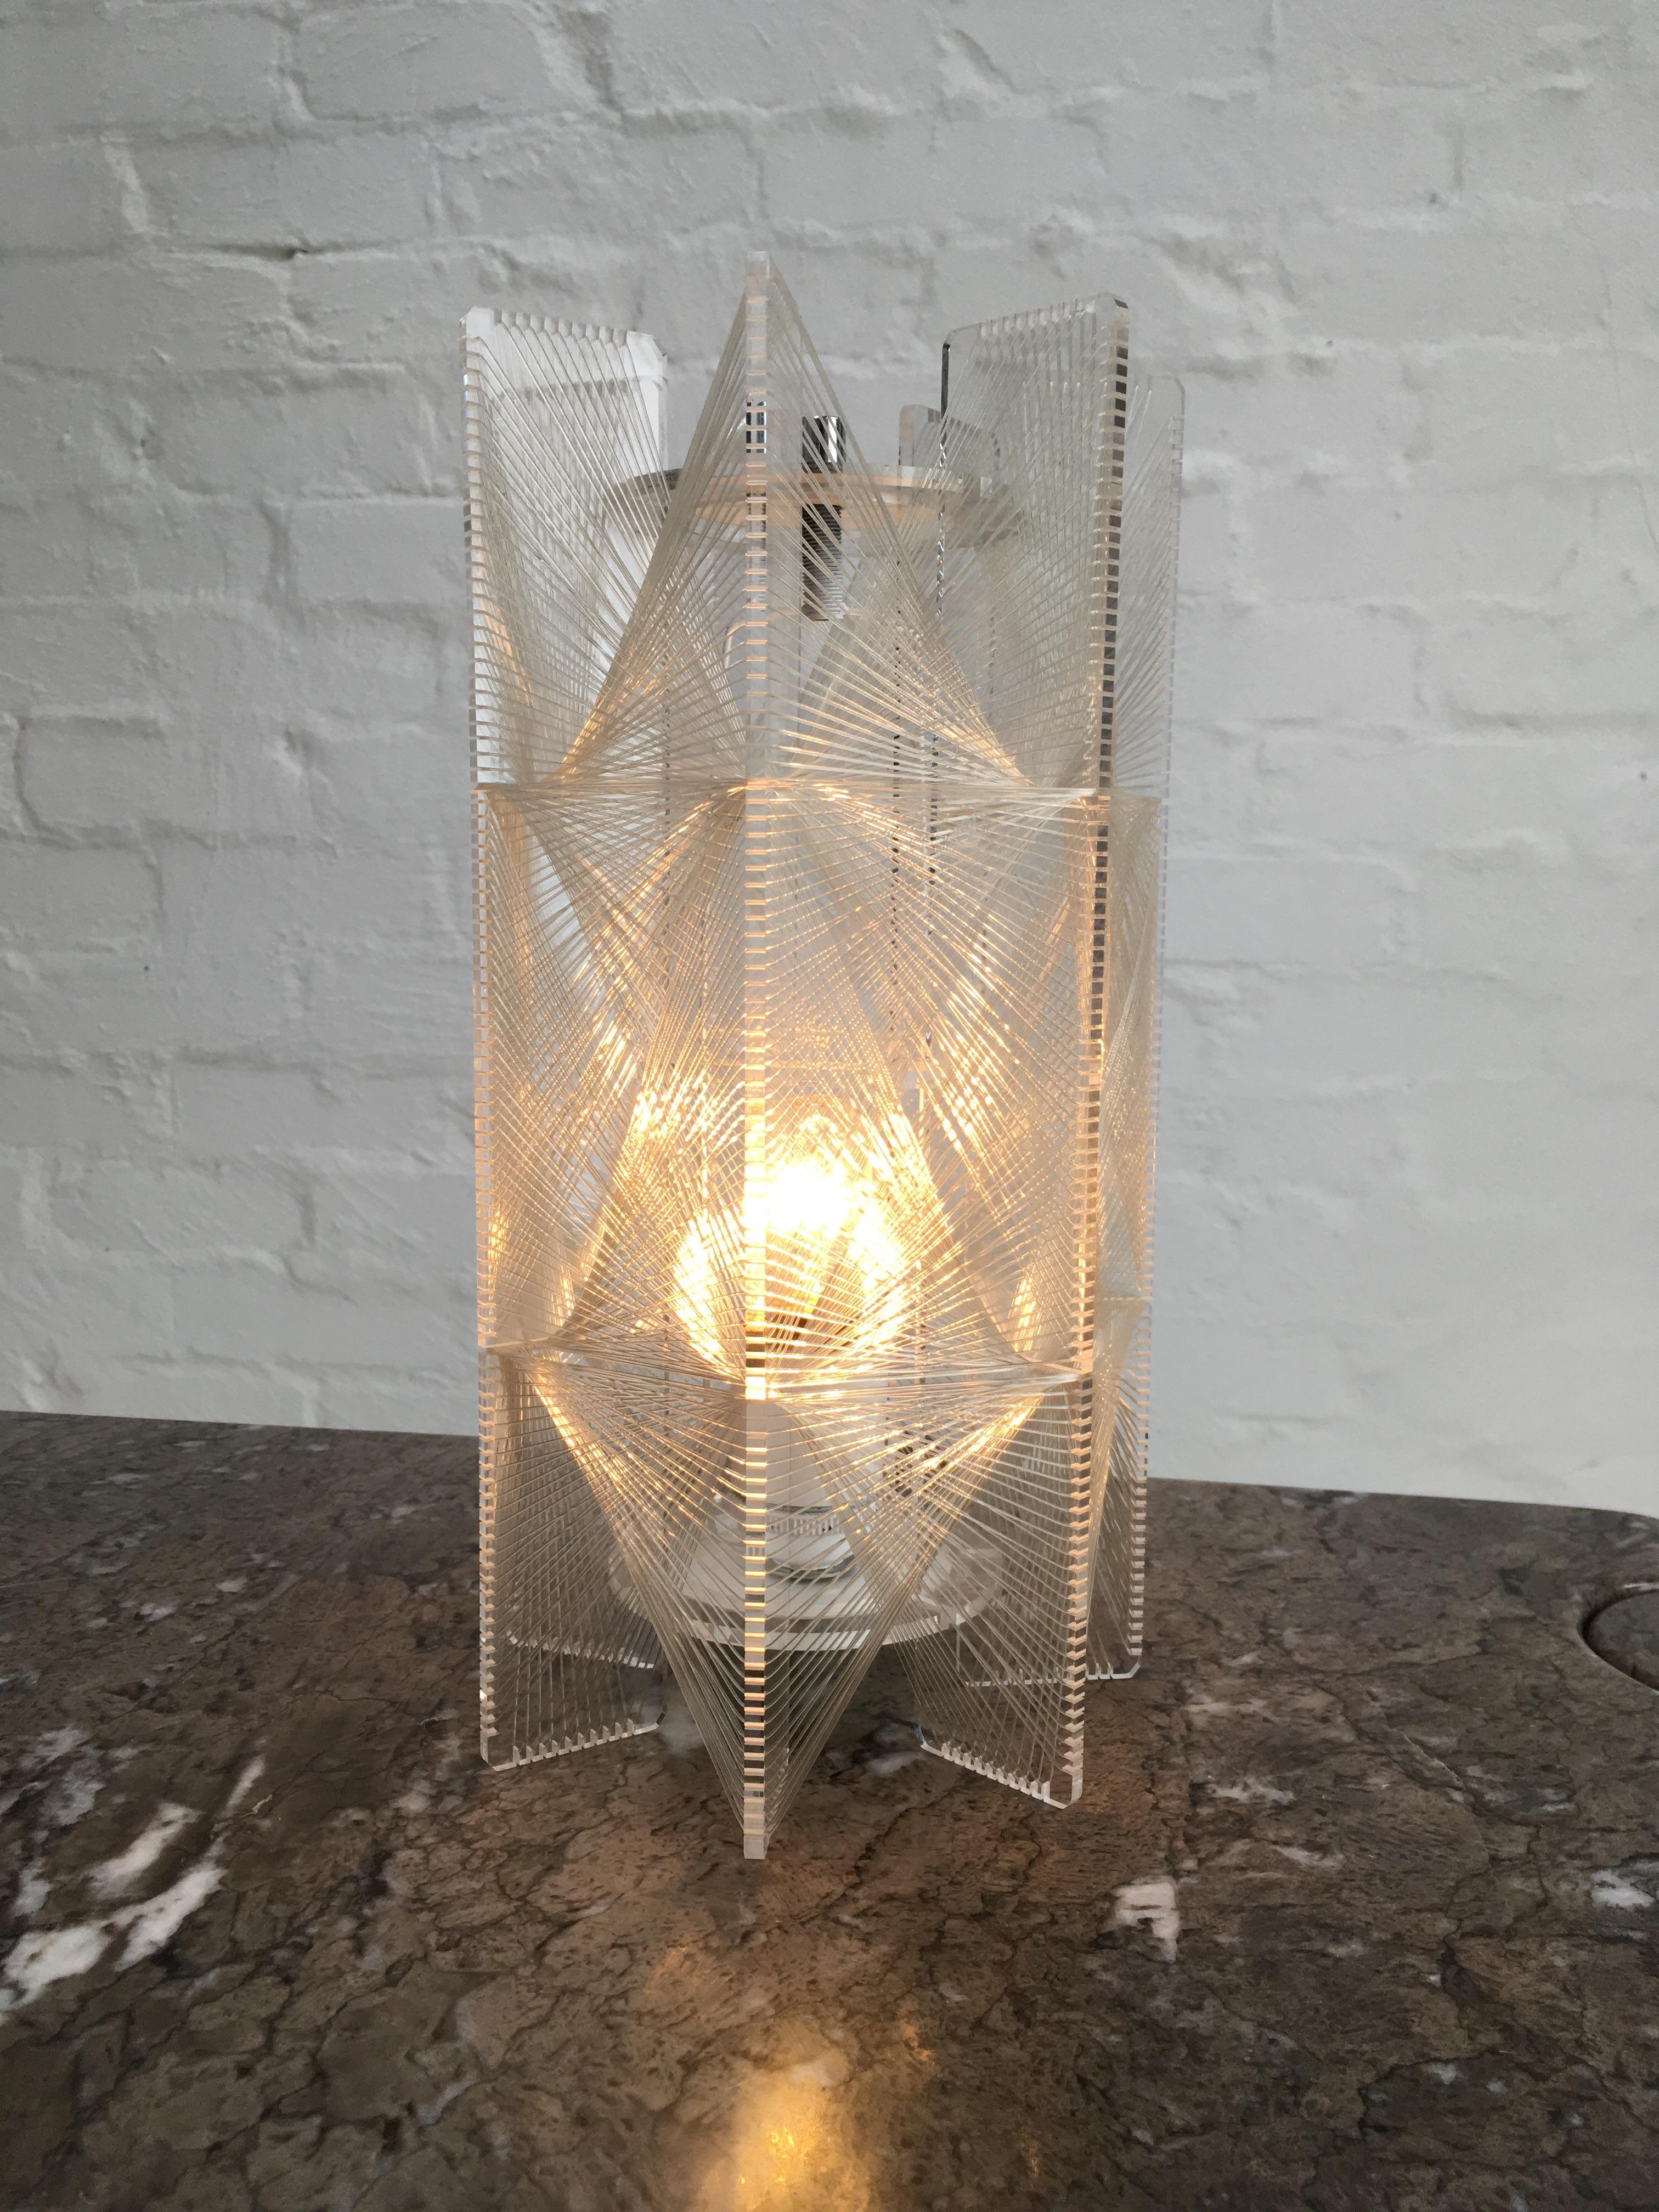 A rare table lamp by Paul Secon. His lights are more commonly found as pendants. 

It had lost is internal fixtures so we had our master craftsman make an appropriate white and chrome harp fixture for the interior, based on images of original Paul